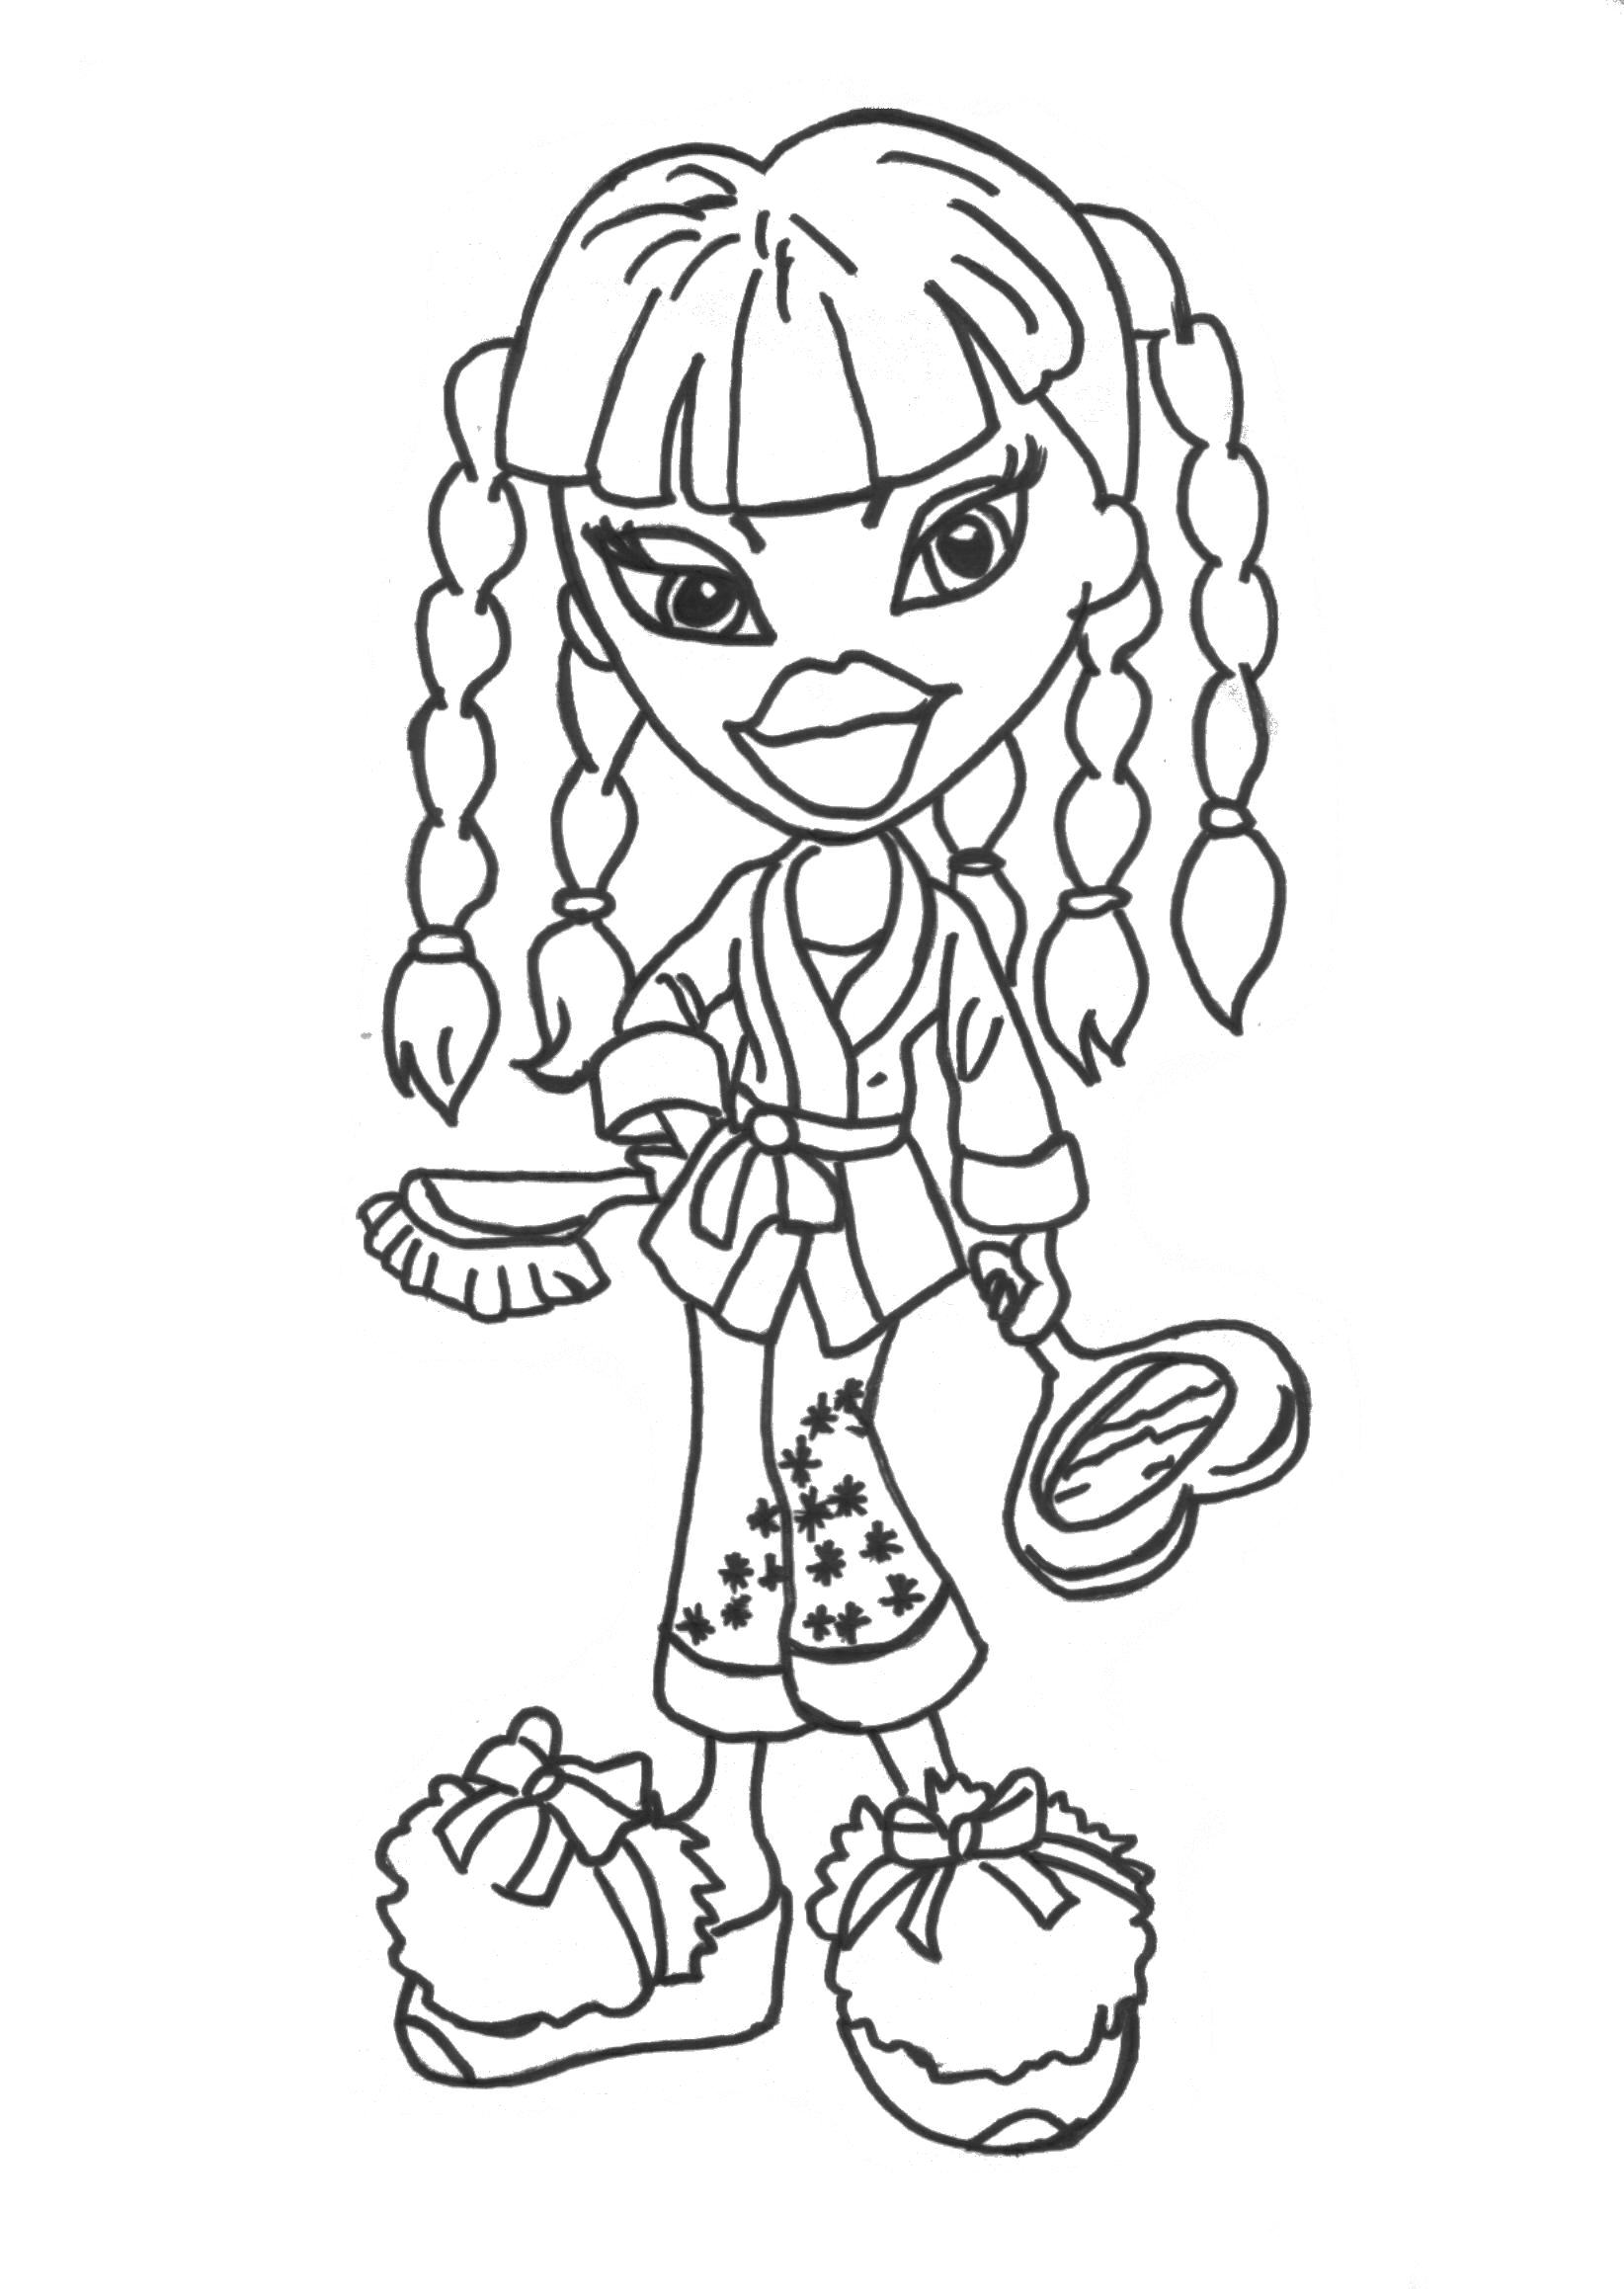 Buy Bratz Coloring Book: GREAT Gift with 50+ coloring pages in